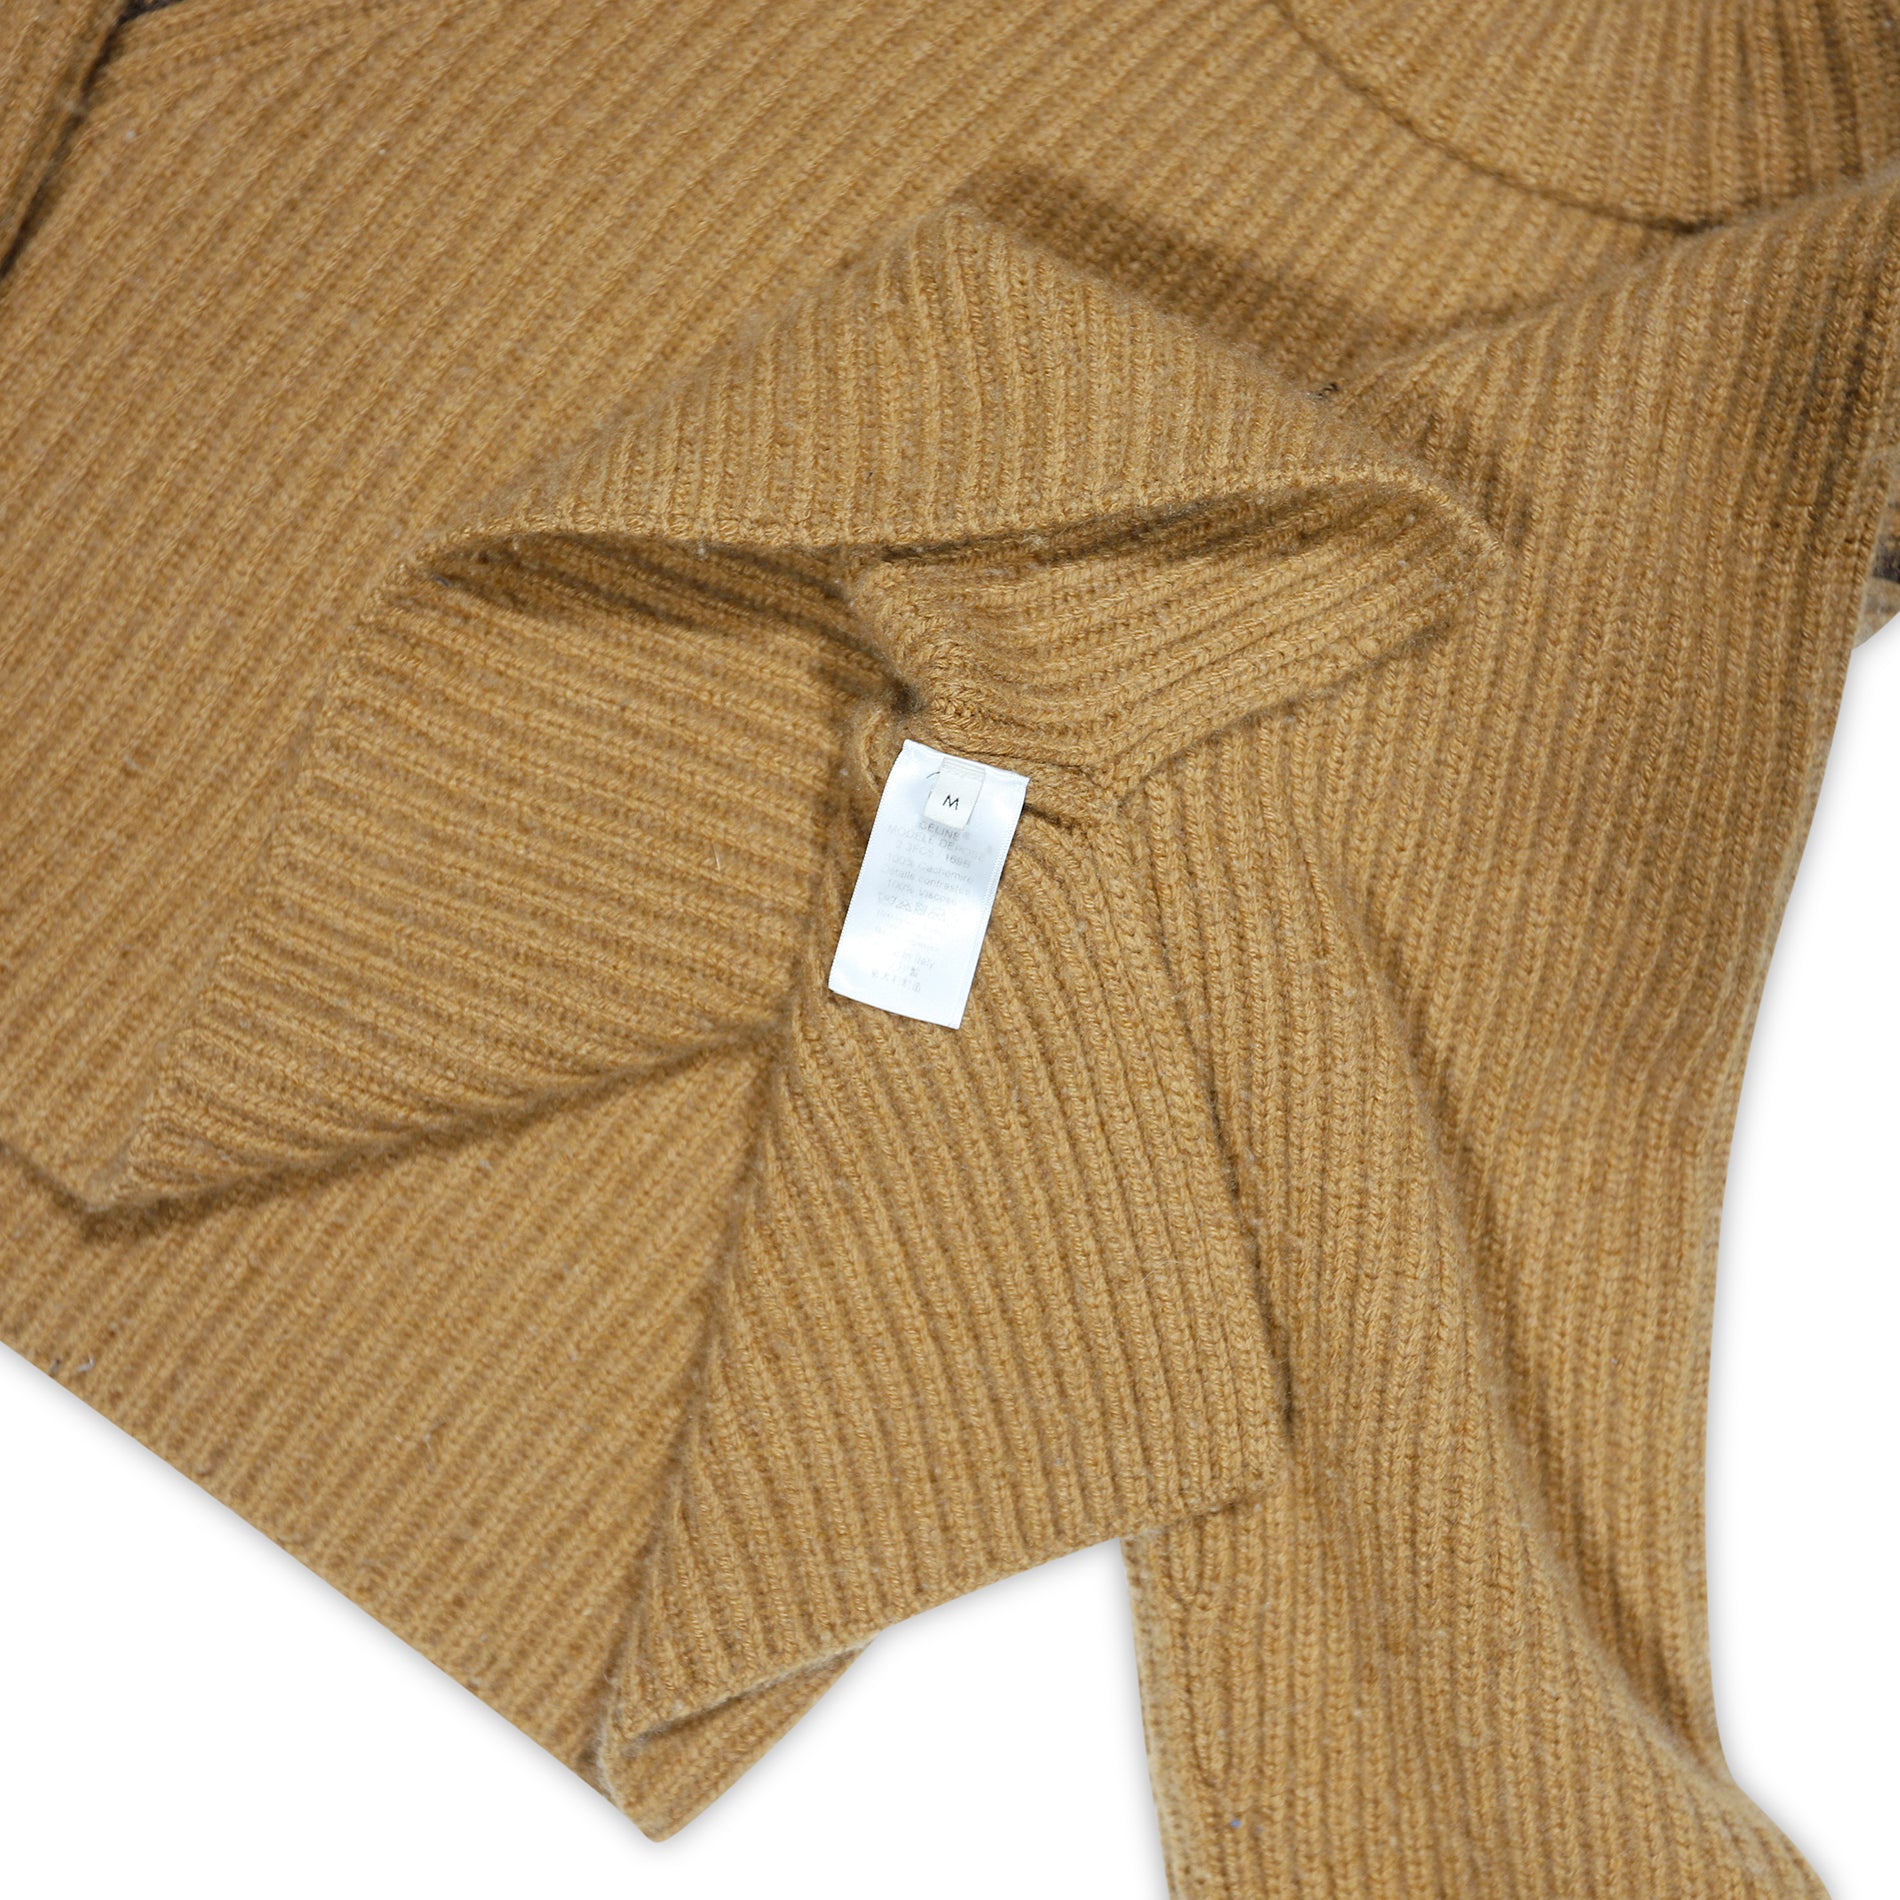 Celine by Phoebe Philo Cut Out Knit Striped Sweater - Ākaibu Store